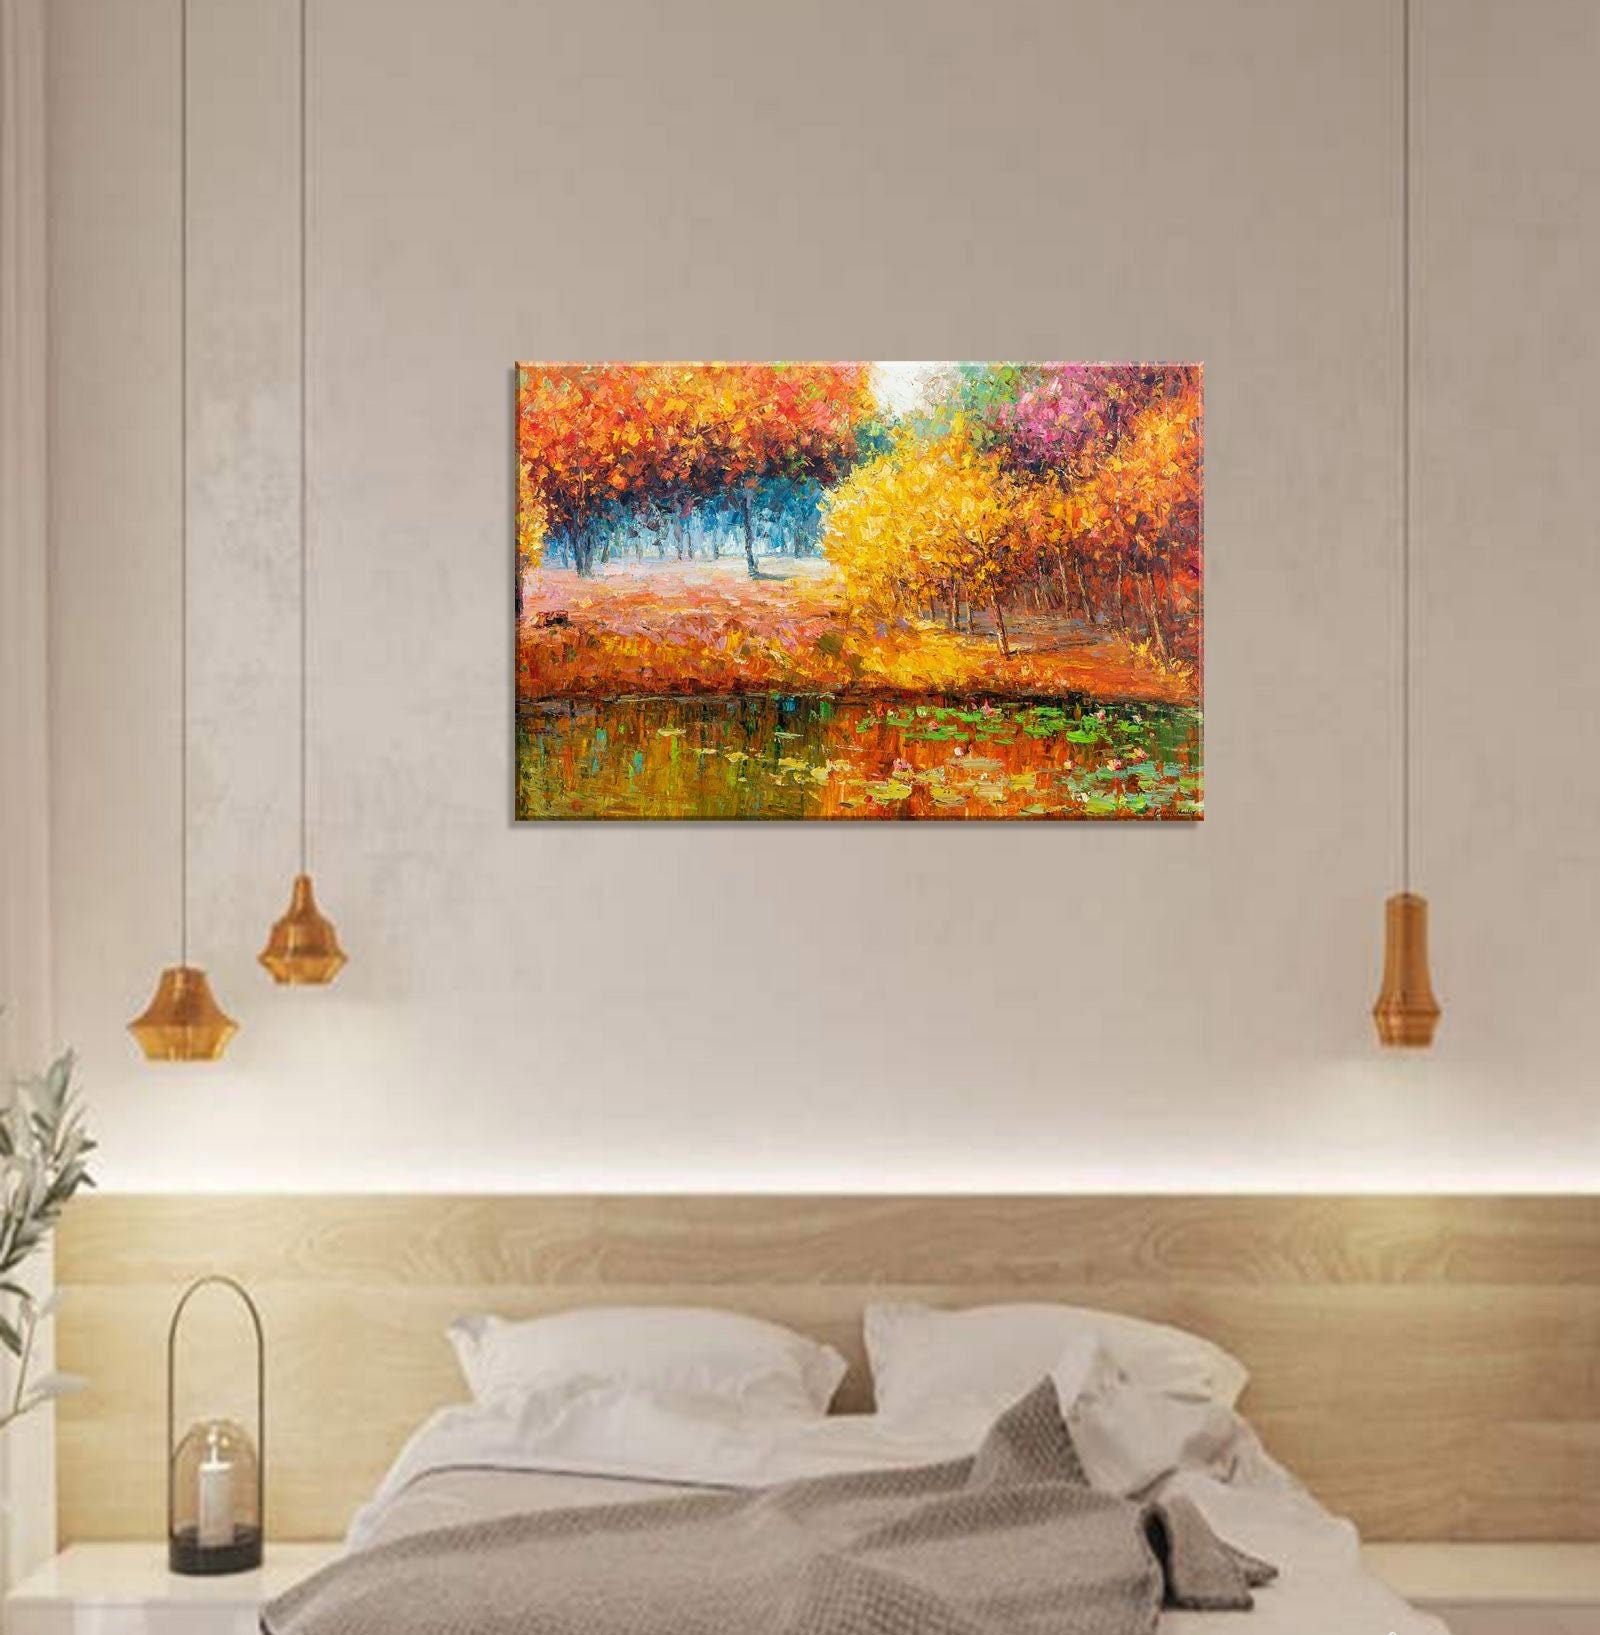 Autumn Forest Landscape Oil Painting, Large Painting, Contemporary Painting, Abstract Art, Original Art, Bedroom Decor, Large Oil Painting